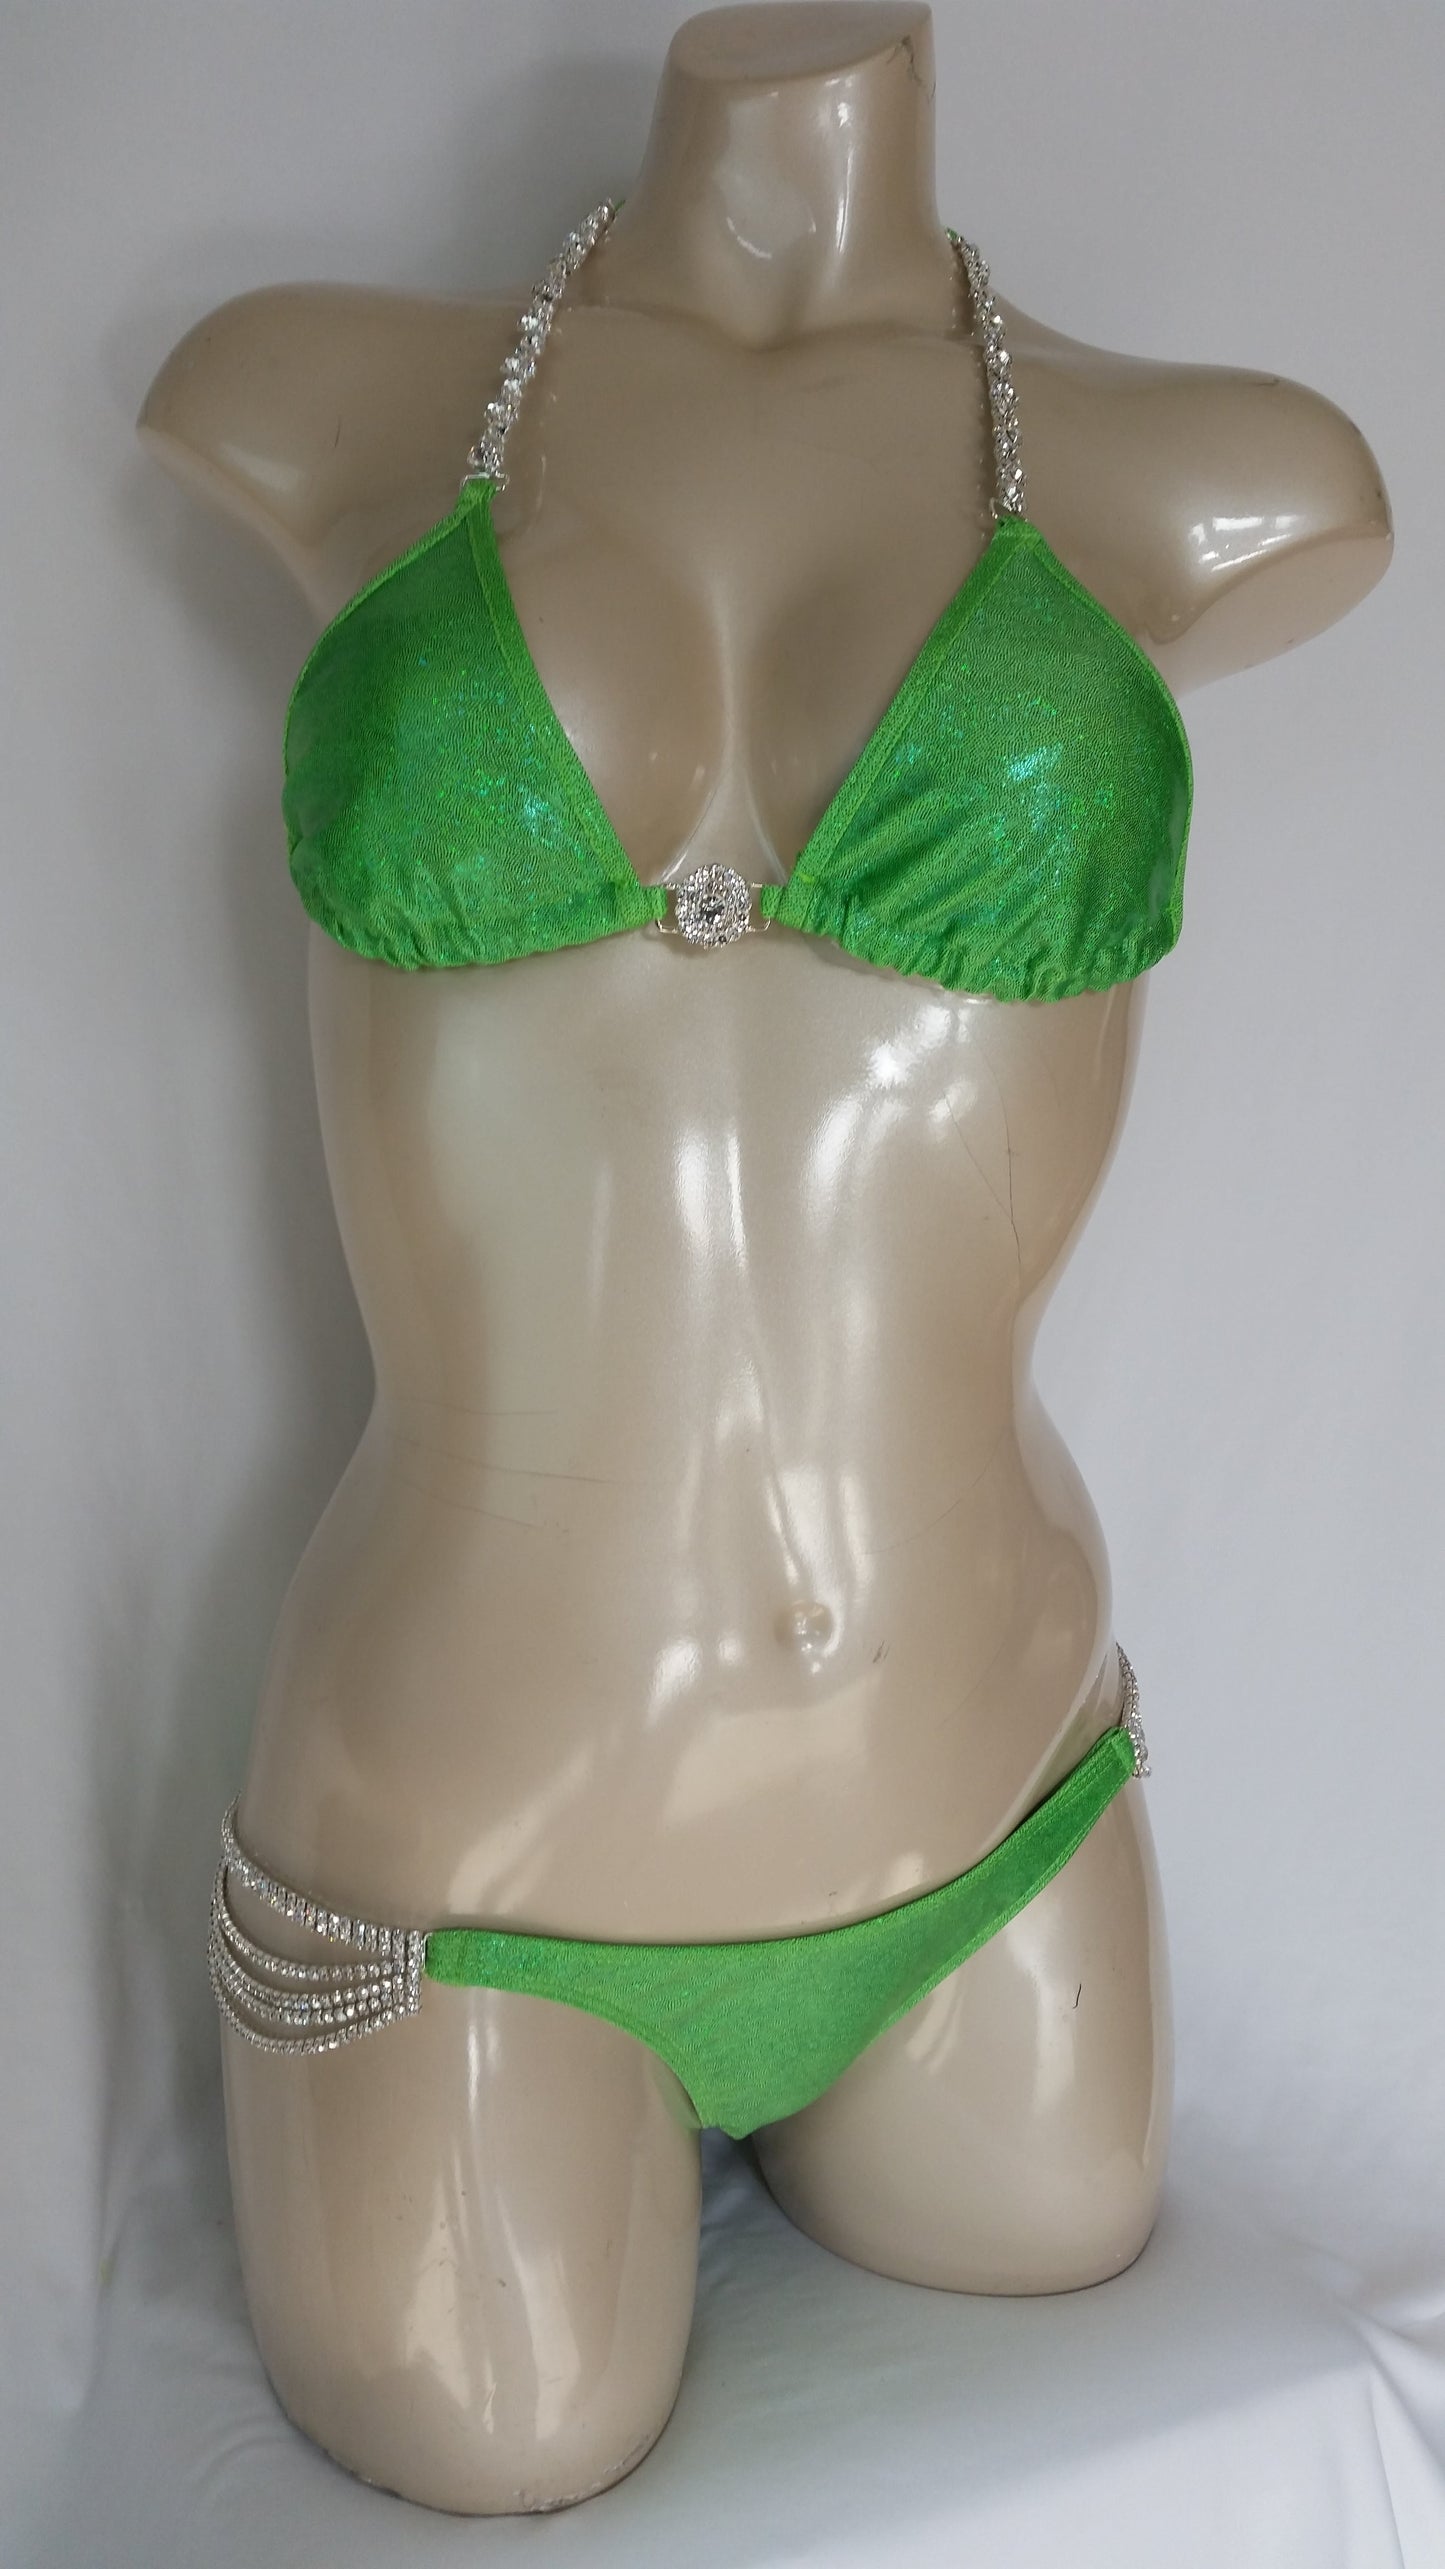 Lime Green Posing Suit